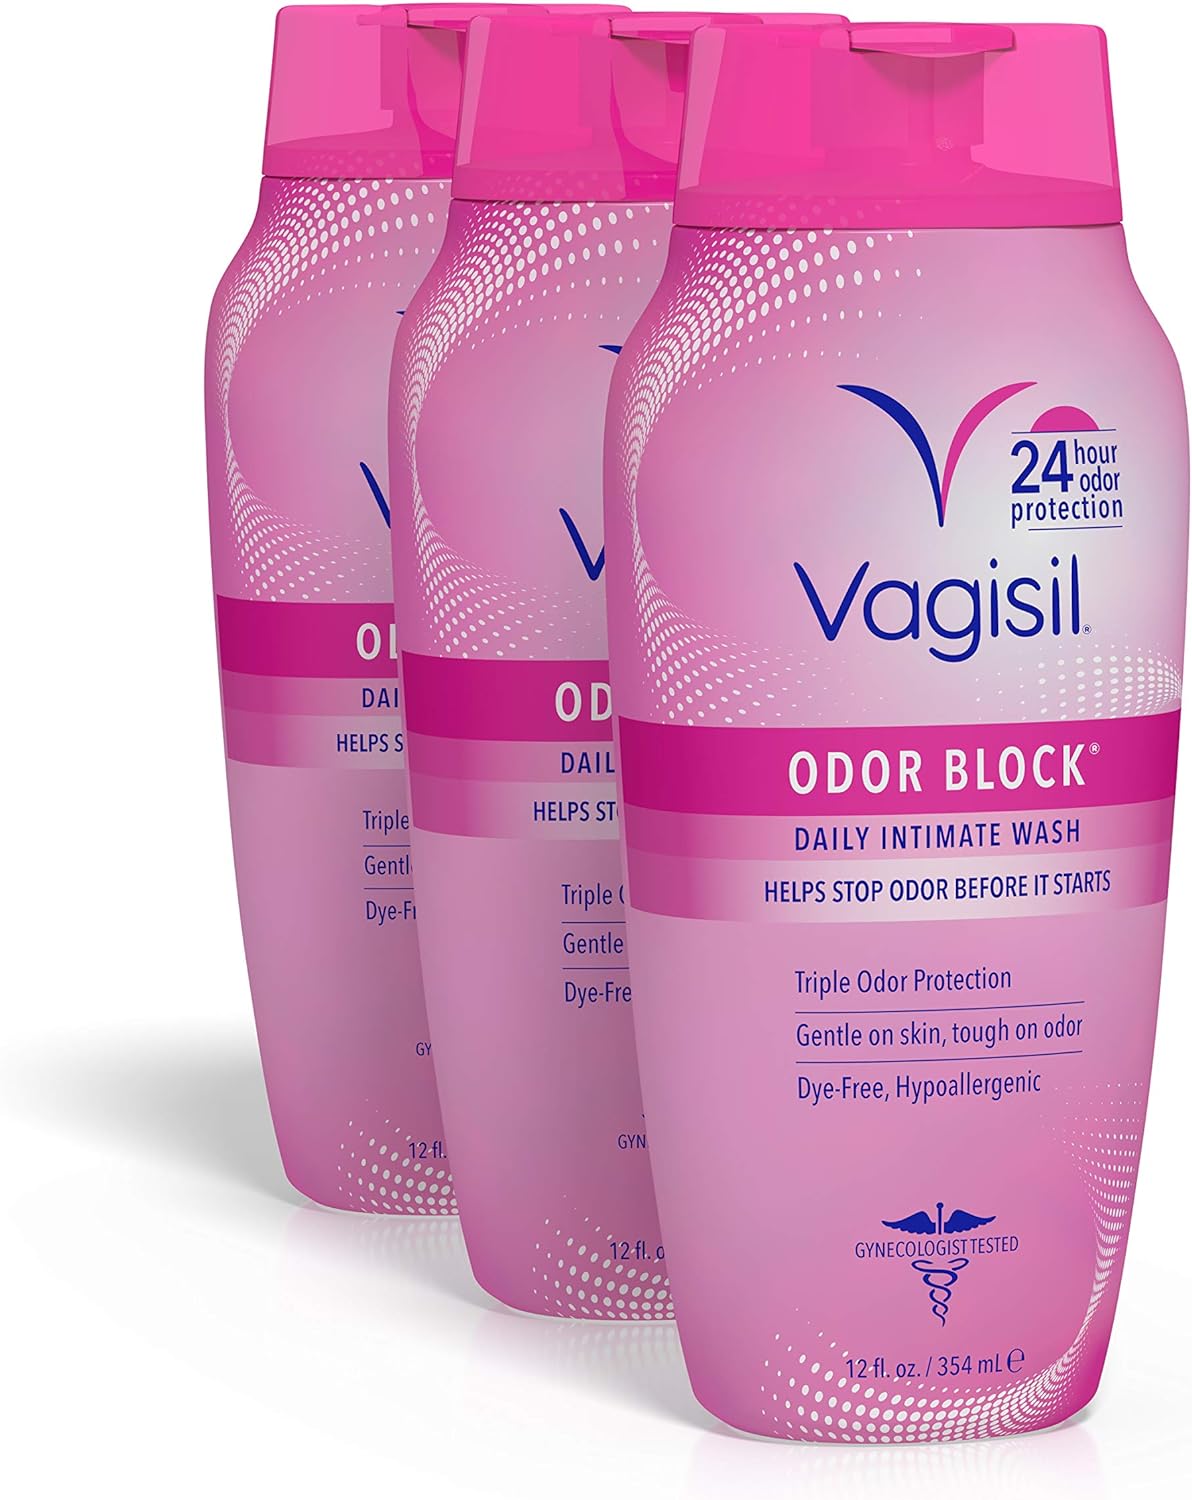 Vagisil Odor Block Daily Intimate Vaginal Feminine Wash, 12 Ounce, 3 pack - image 1 of 8